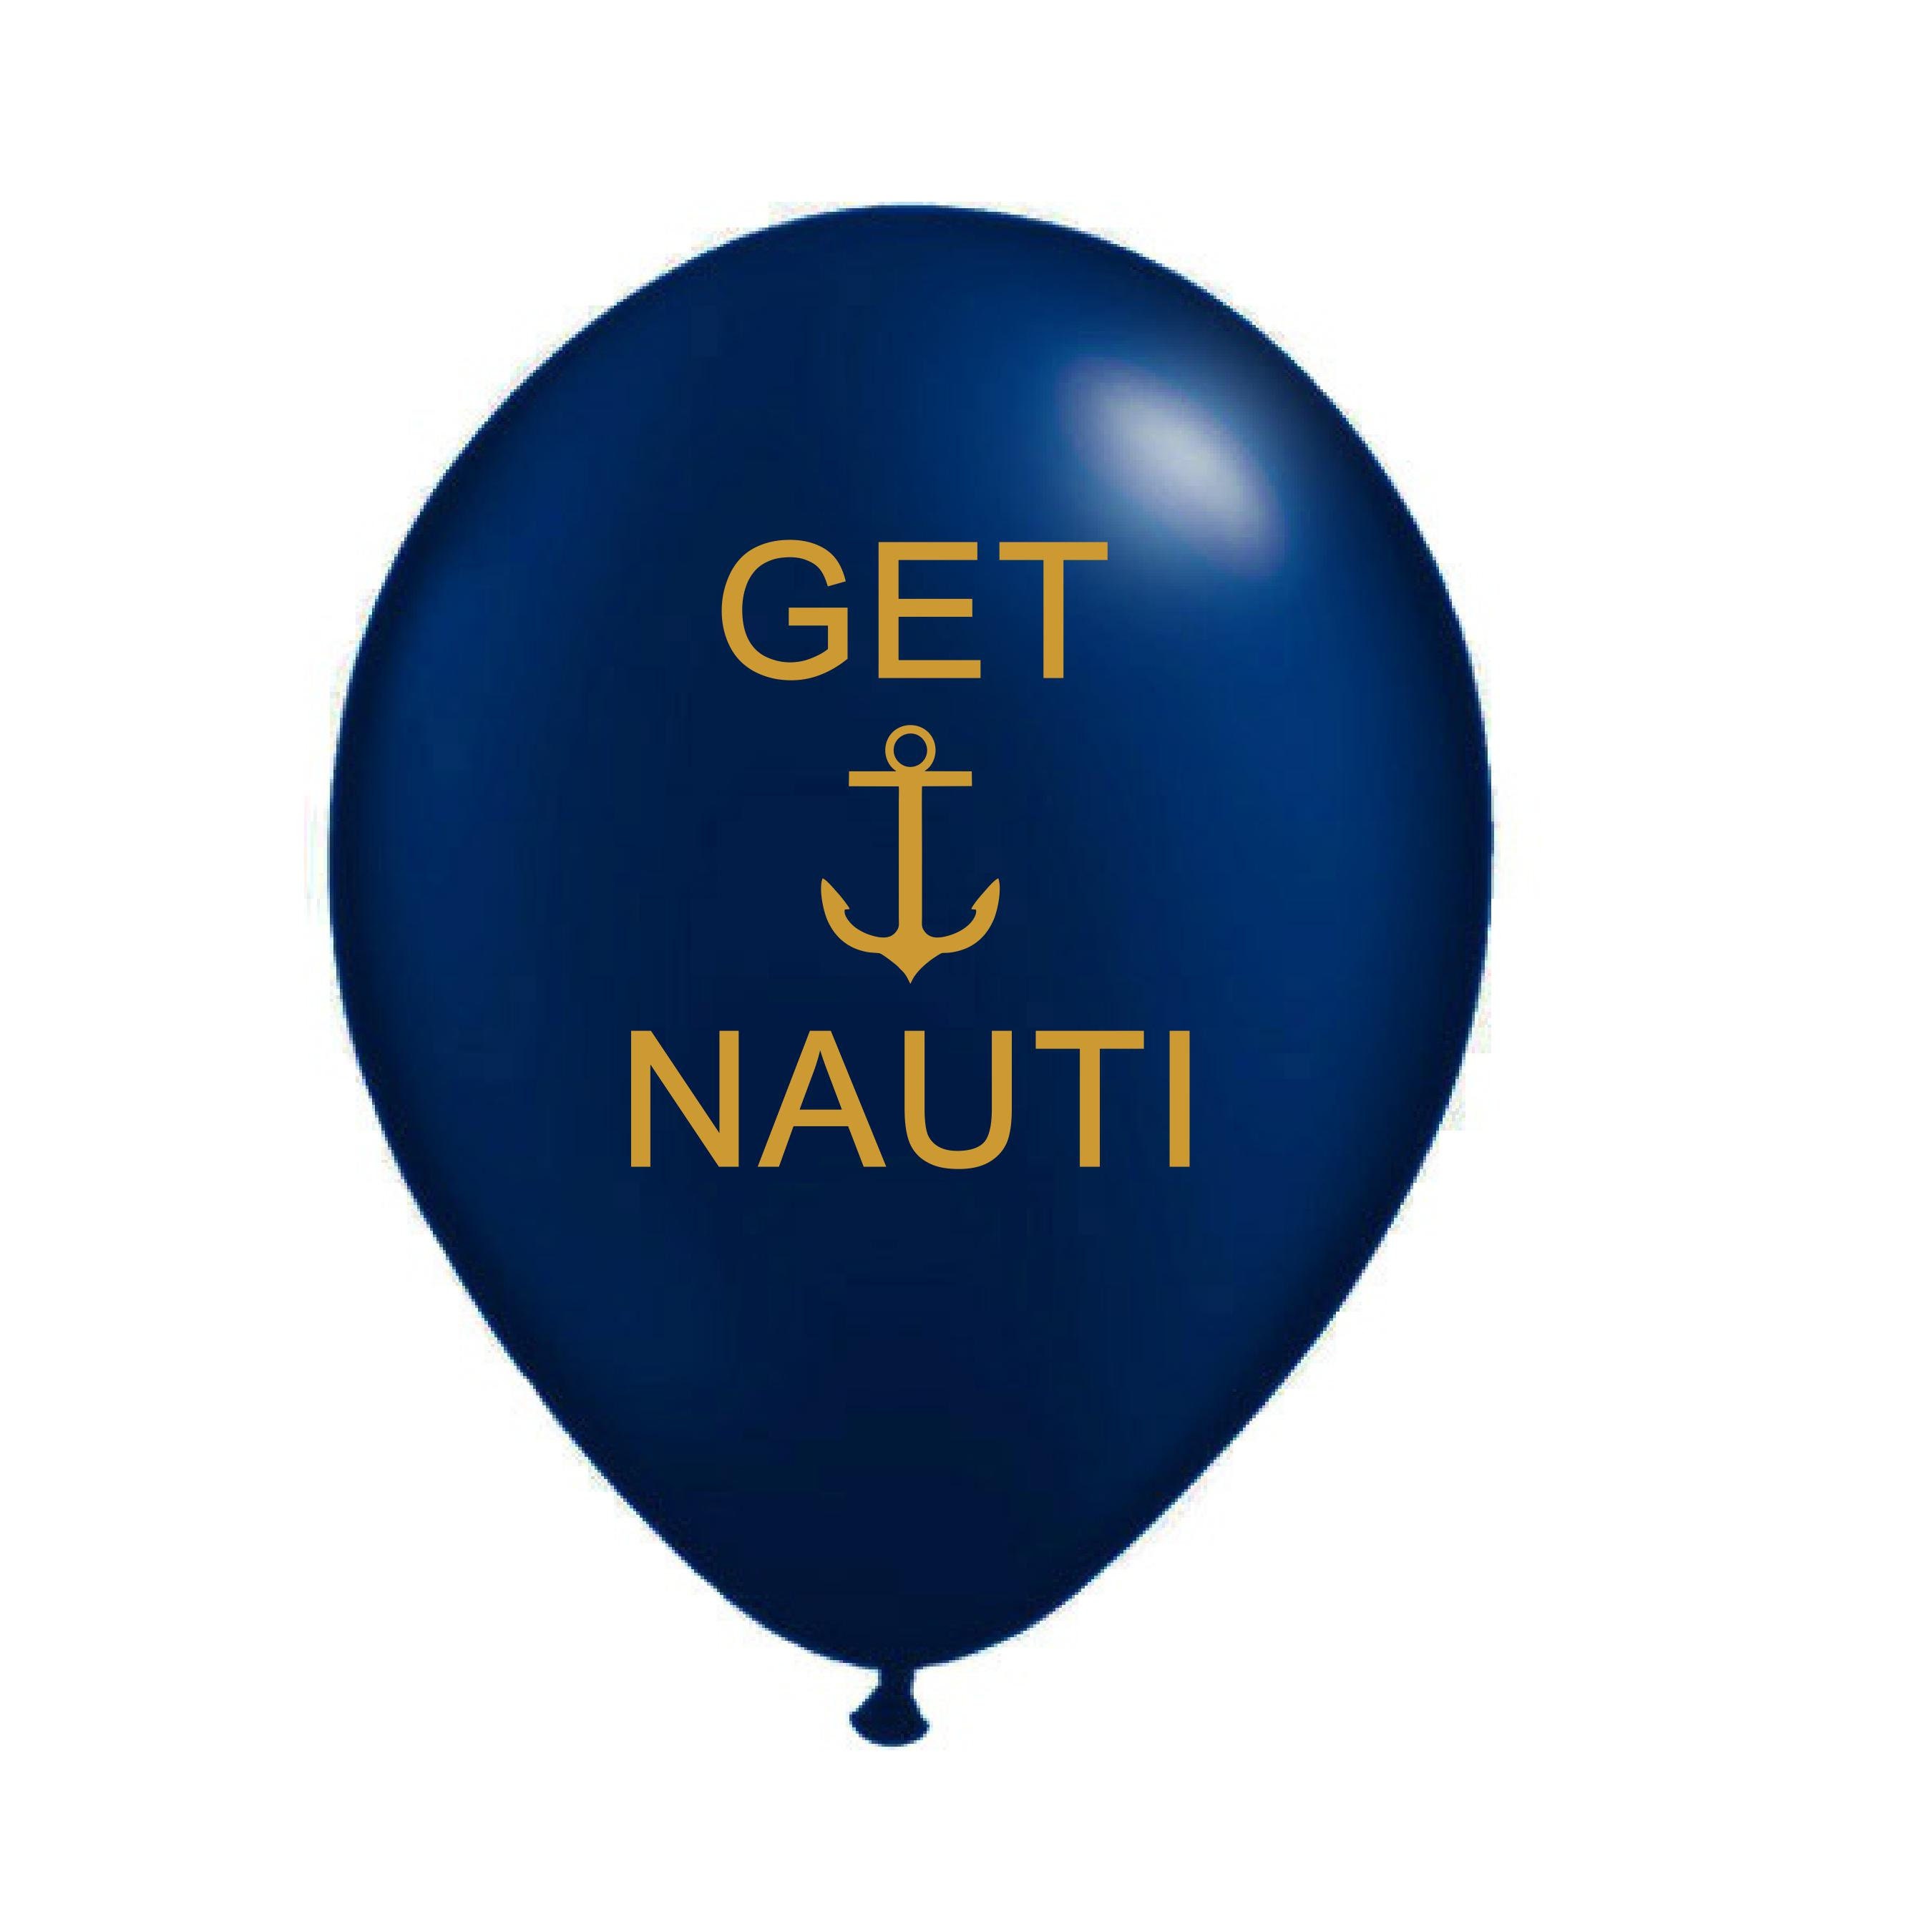 Get Nauti Balloons, Bachelorette Balloons, Nautical, Boating Party  Supplies, Nautical Party Decor, Balloon with Anchor, Latex Navy and Gold